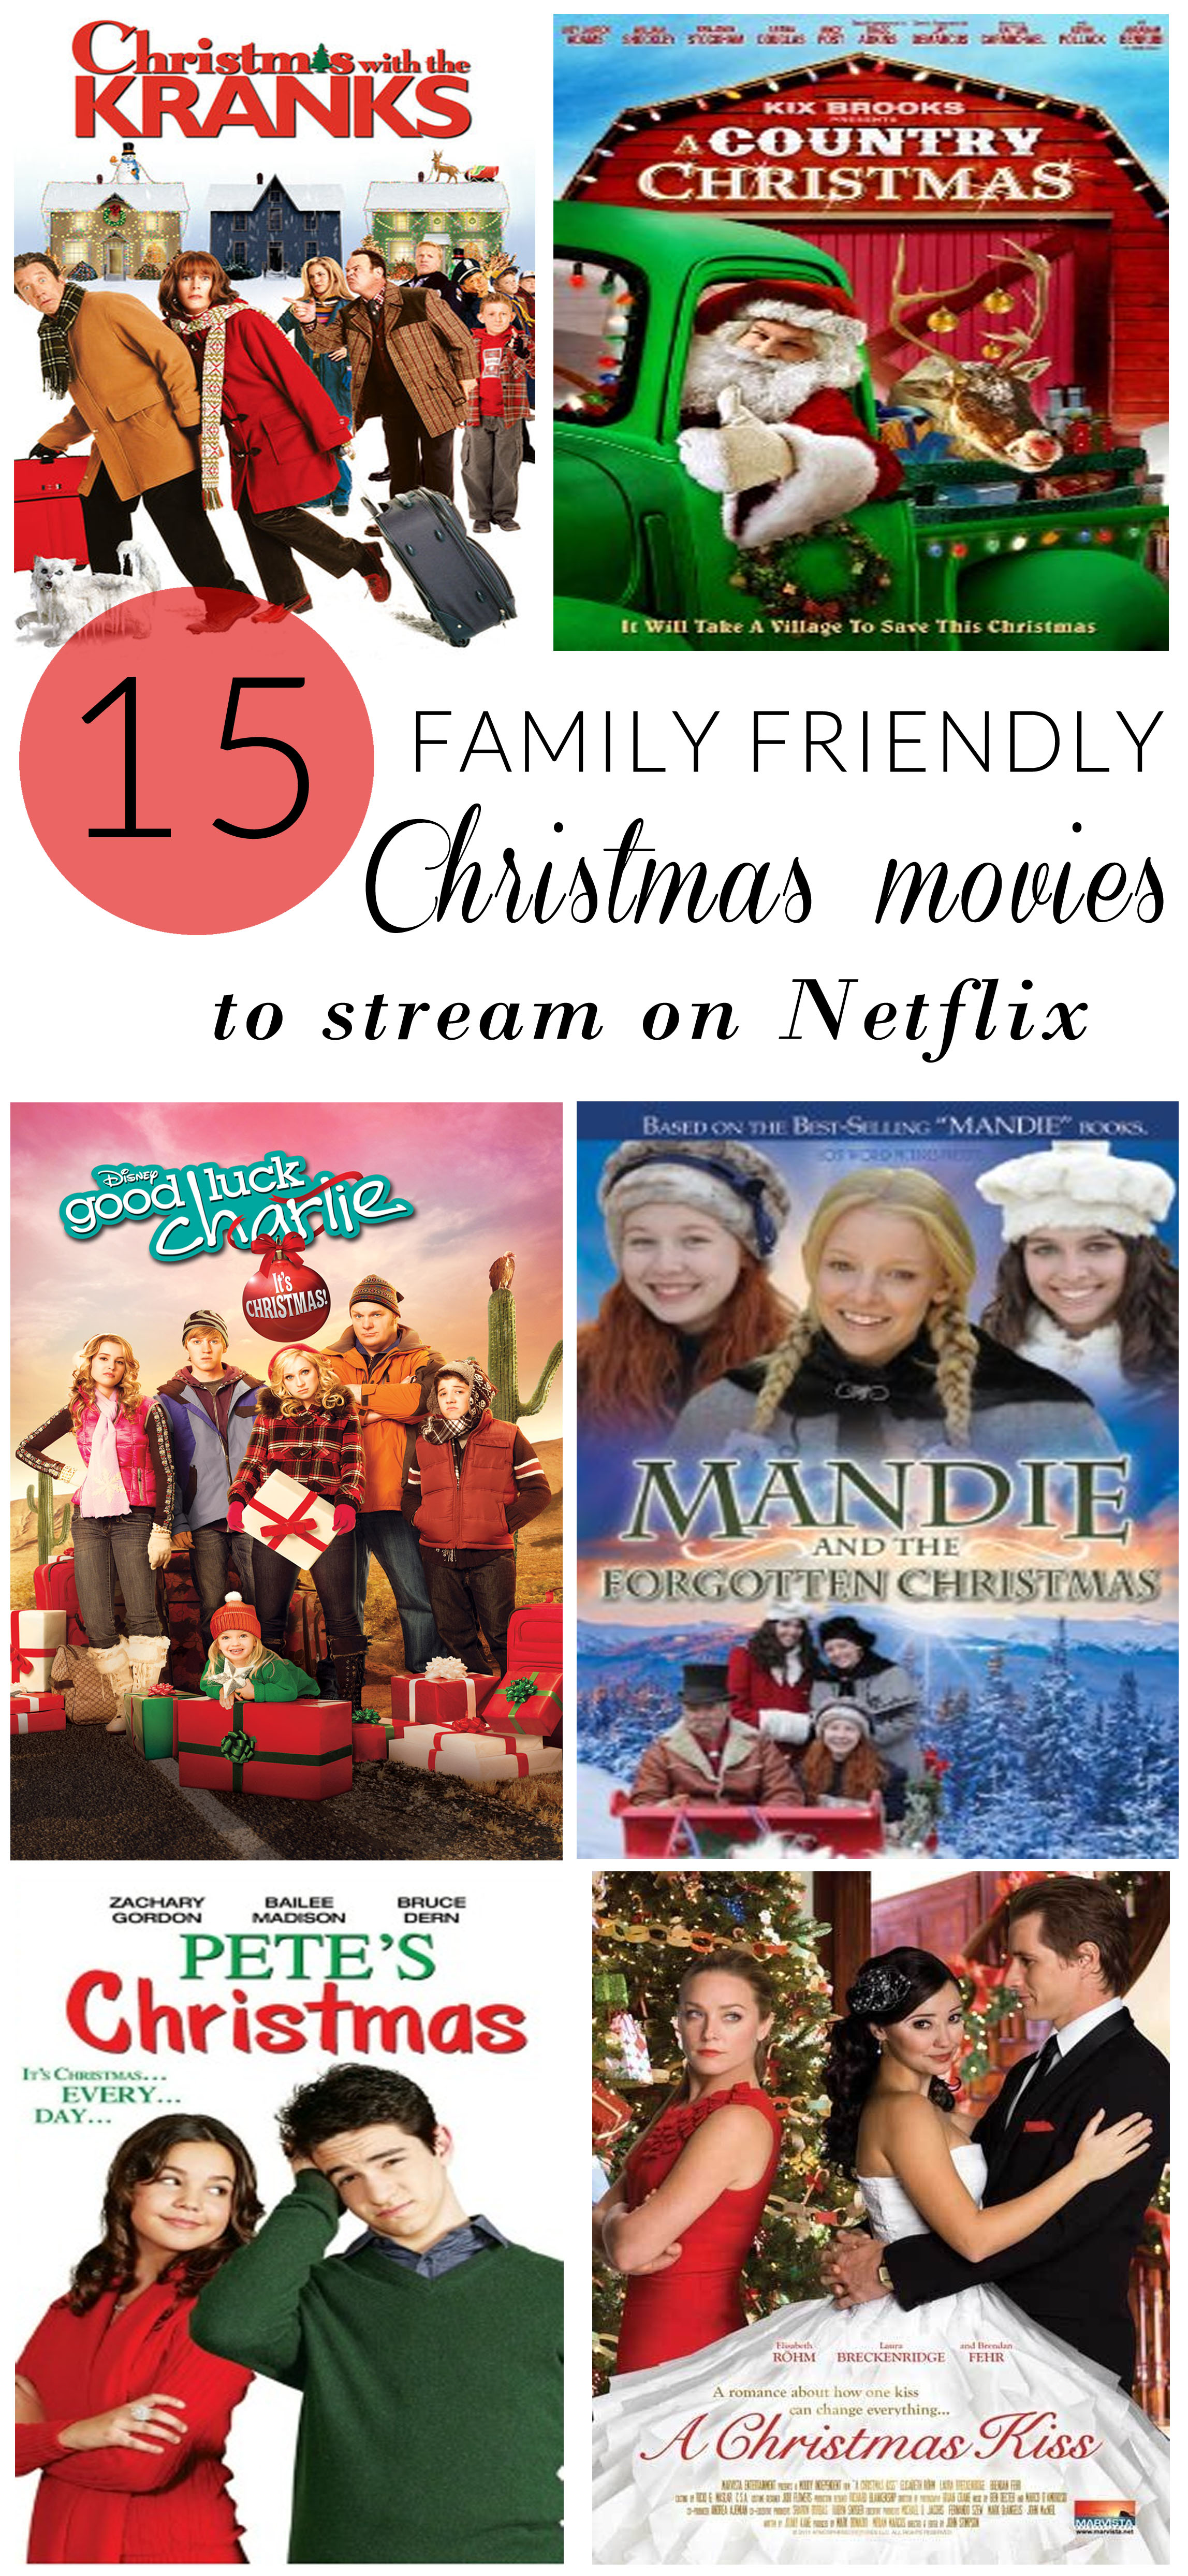 15 Family Friendly Christmas Movies to Stream on Netflix